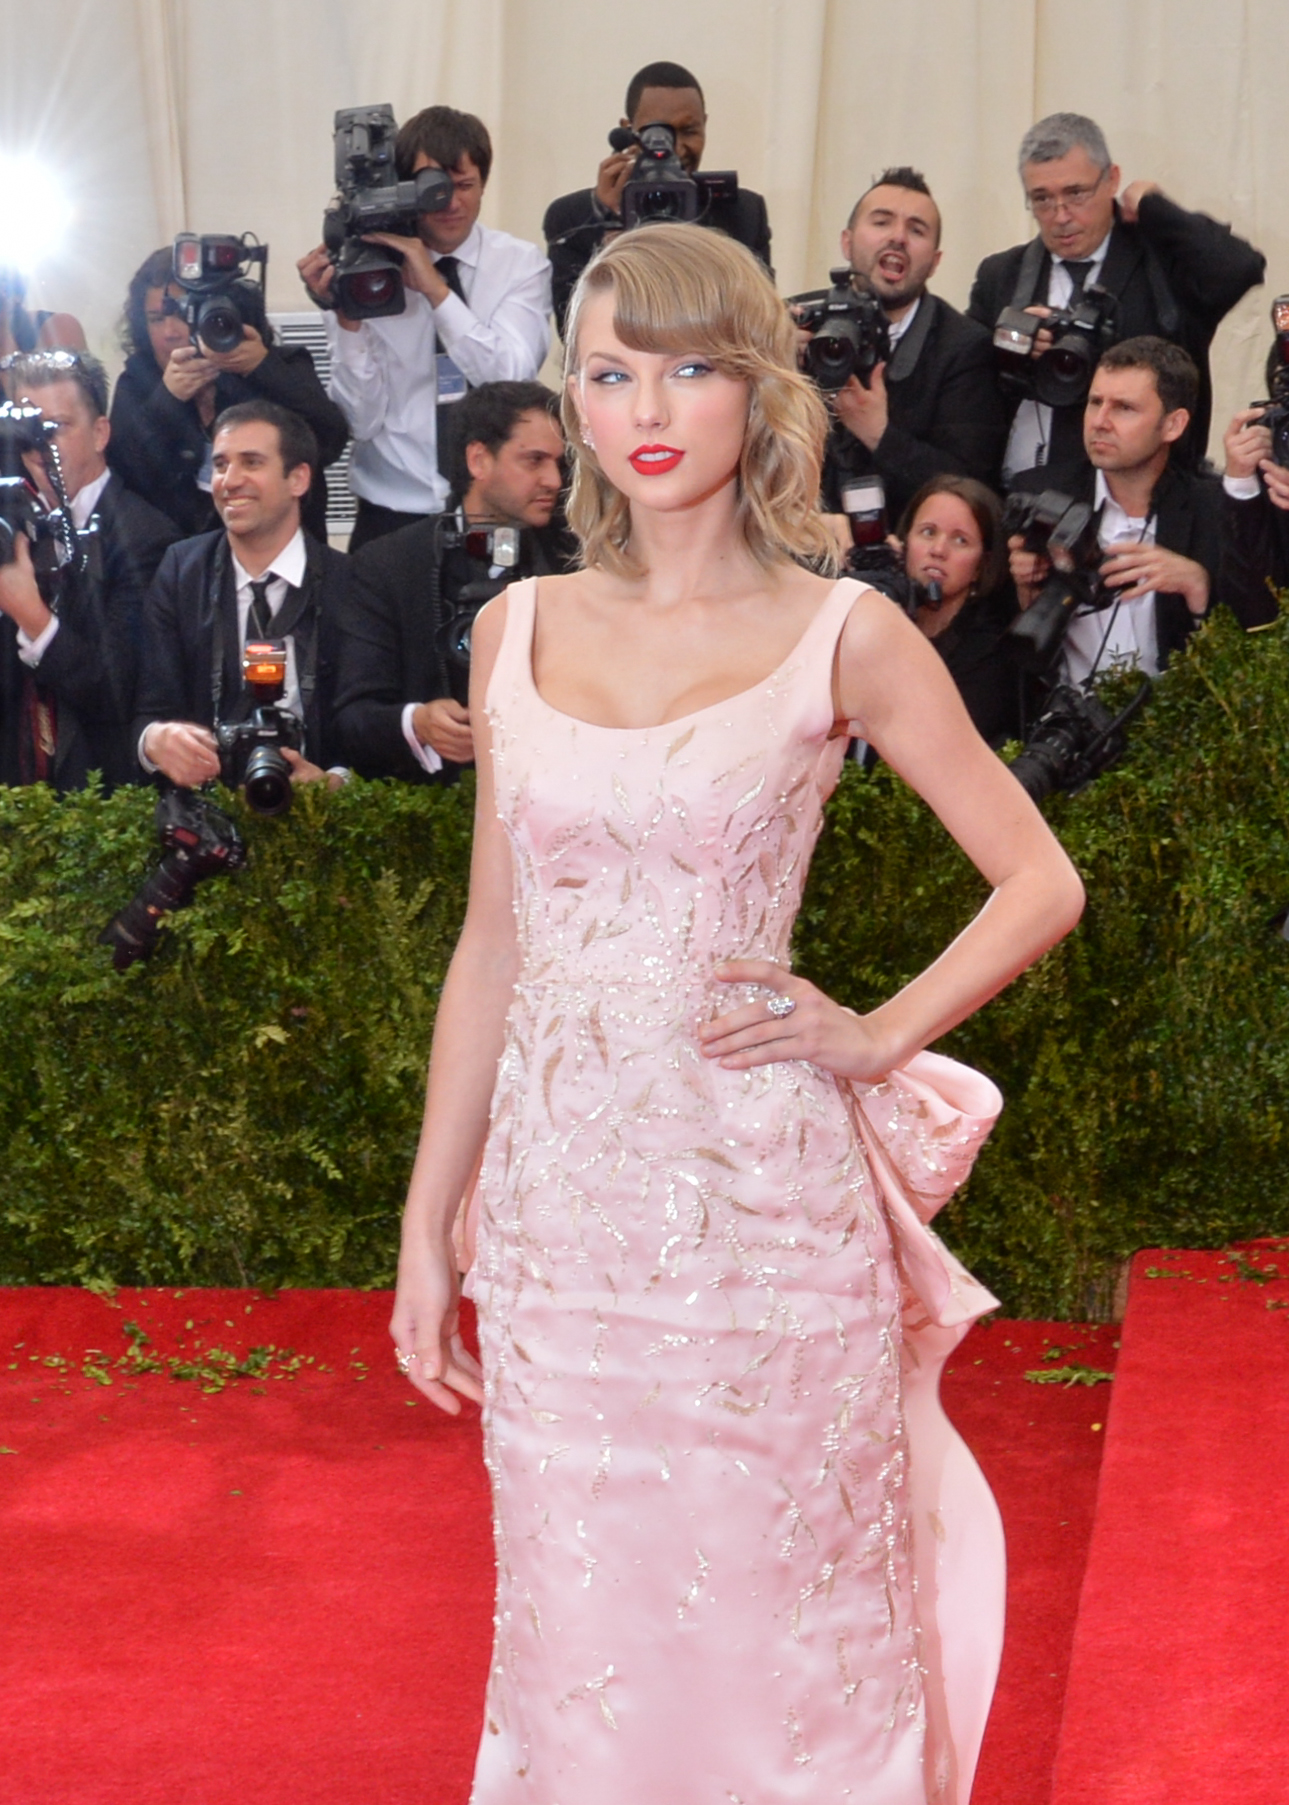 Taylor Swift's 30 best red carpet looks, in honor of her 30th birthday